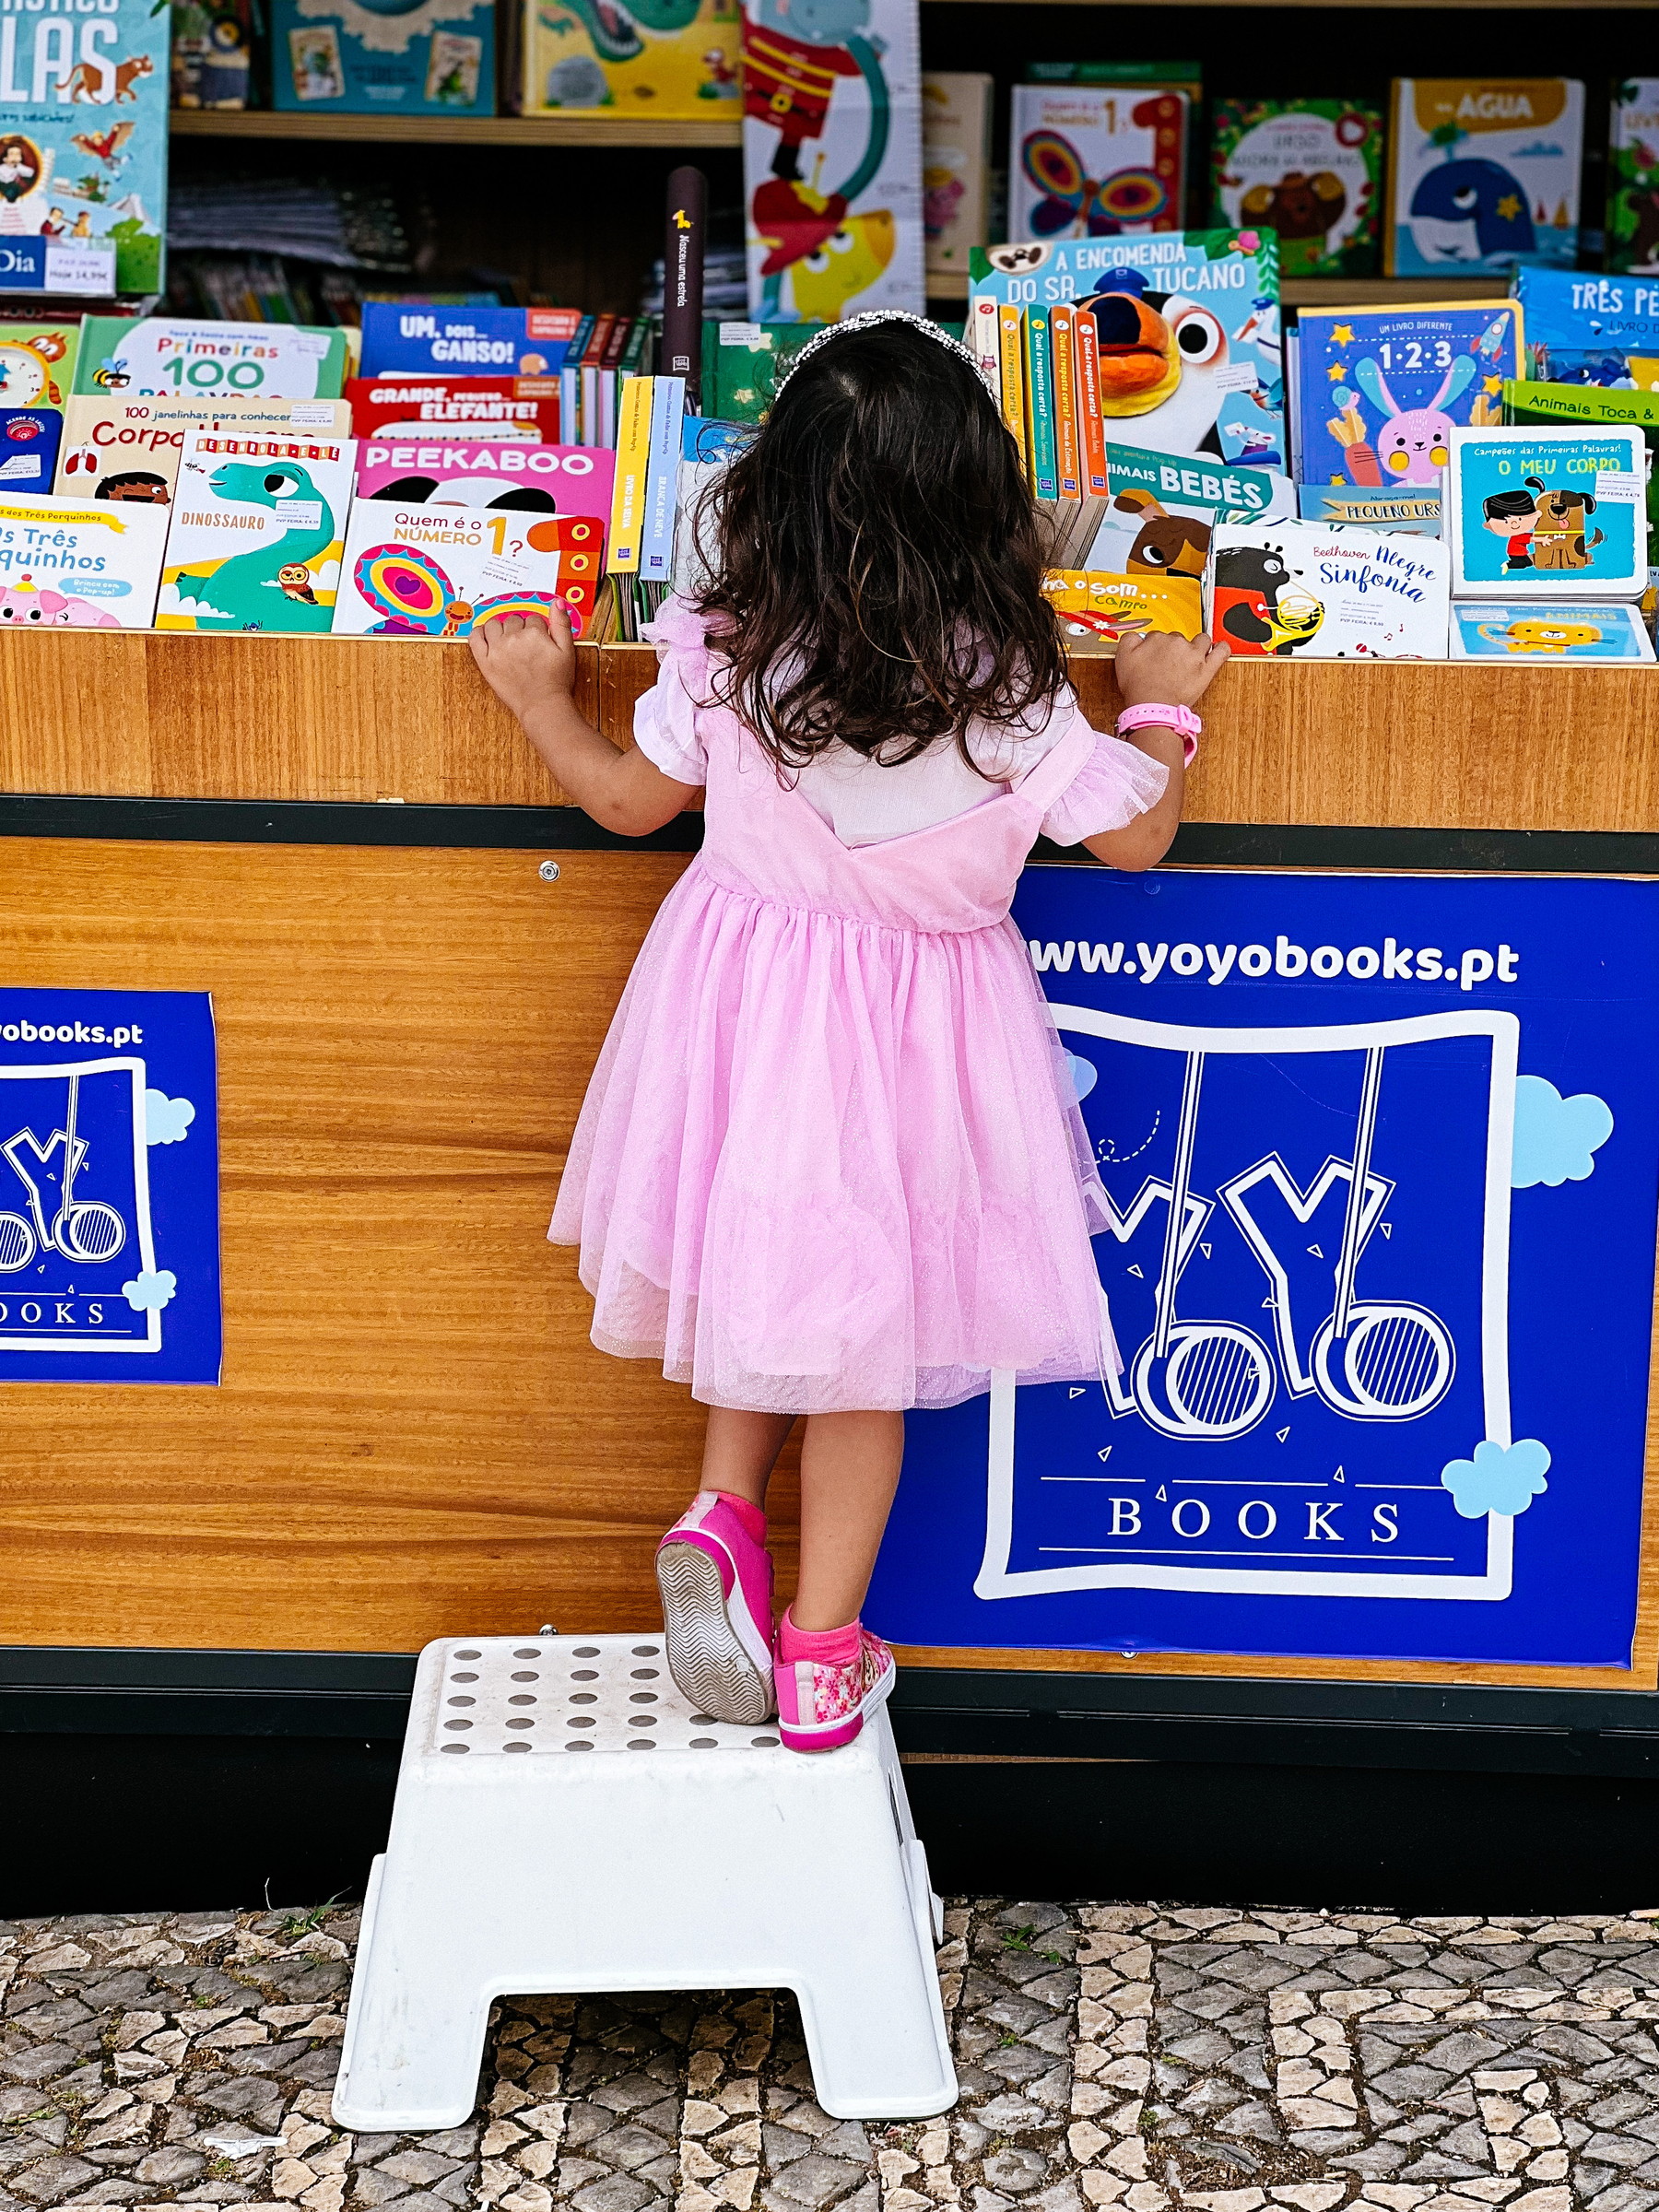 a girl stands on a stool, looking at a book stand